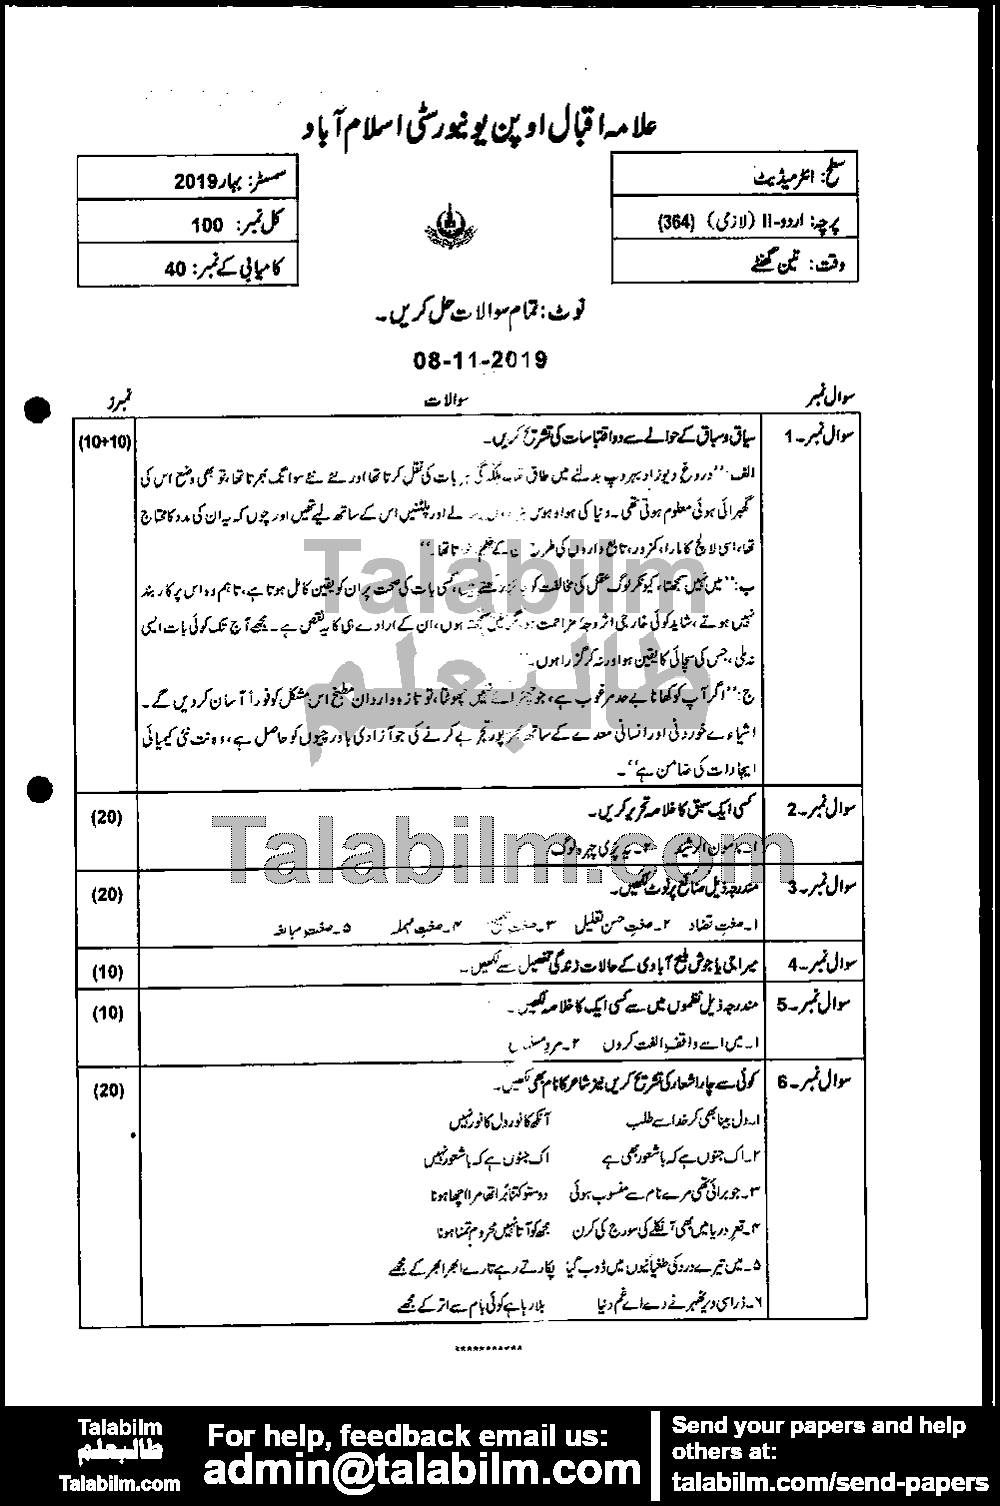 Urdu-II 364 past paper for Spring 2019 Page No. 2